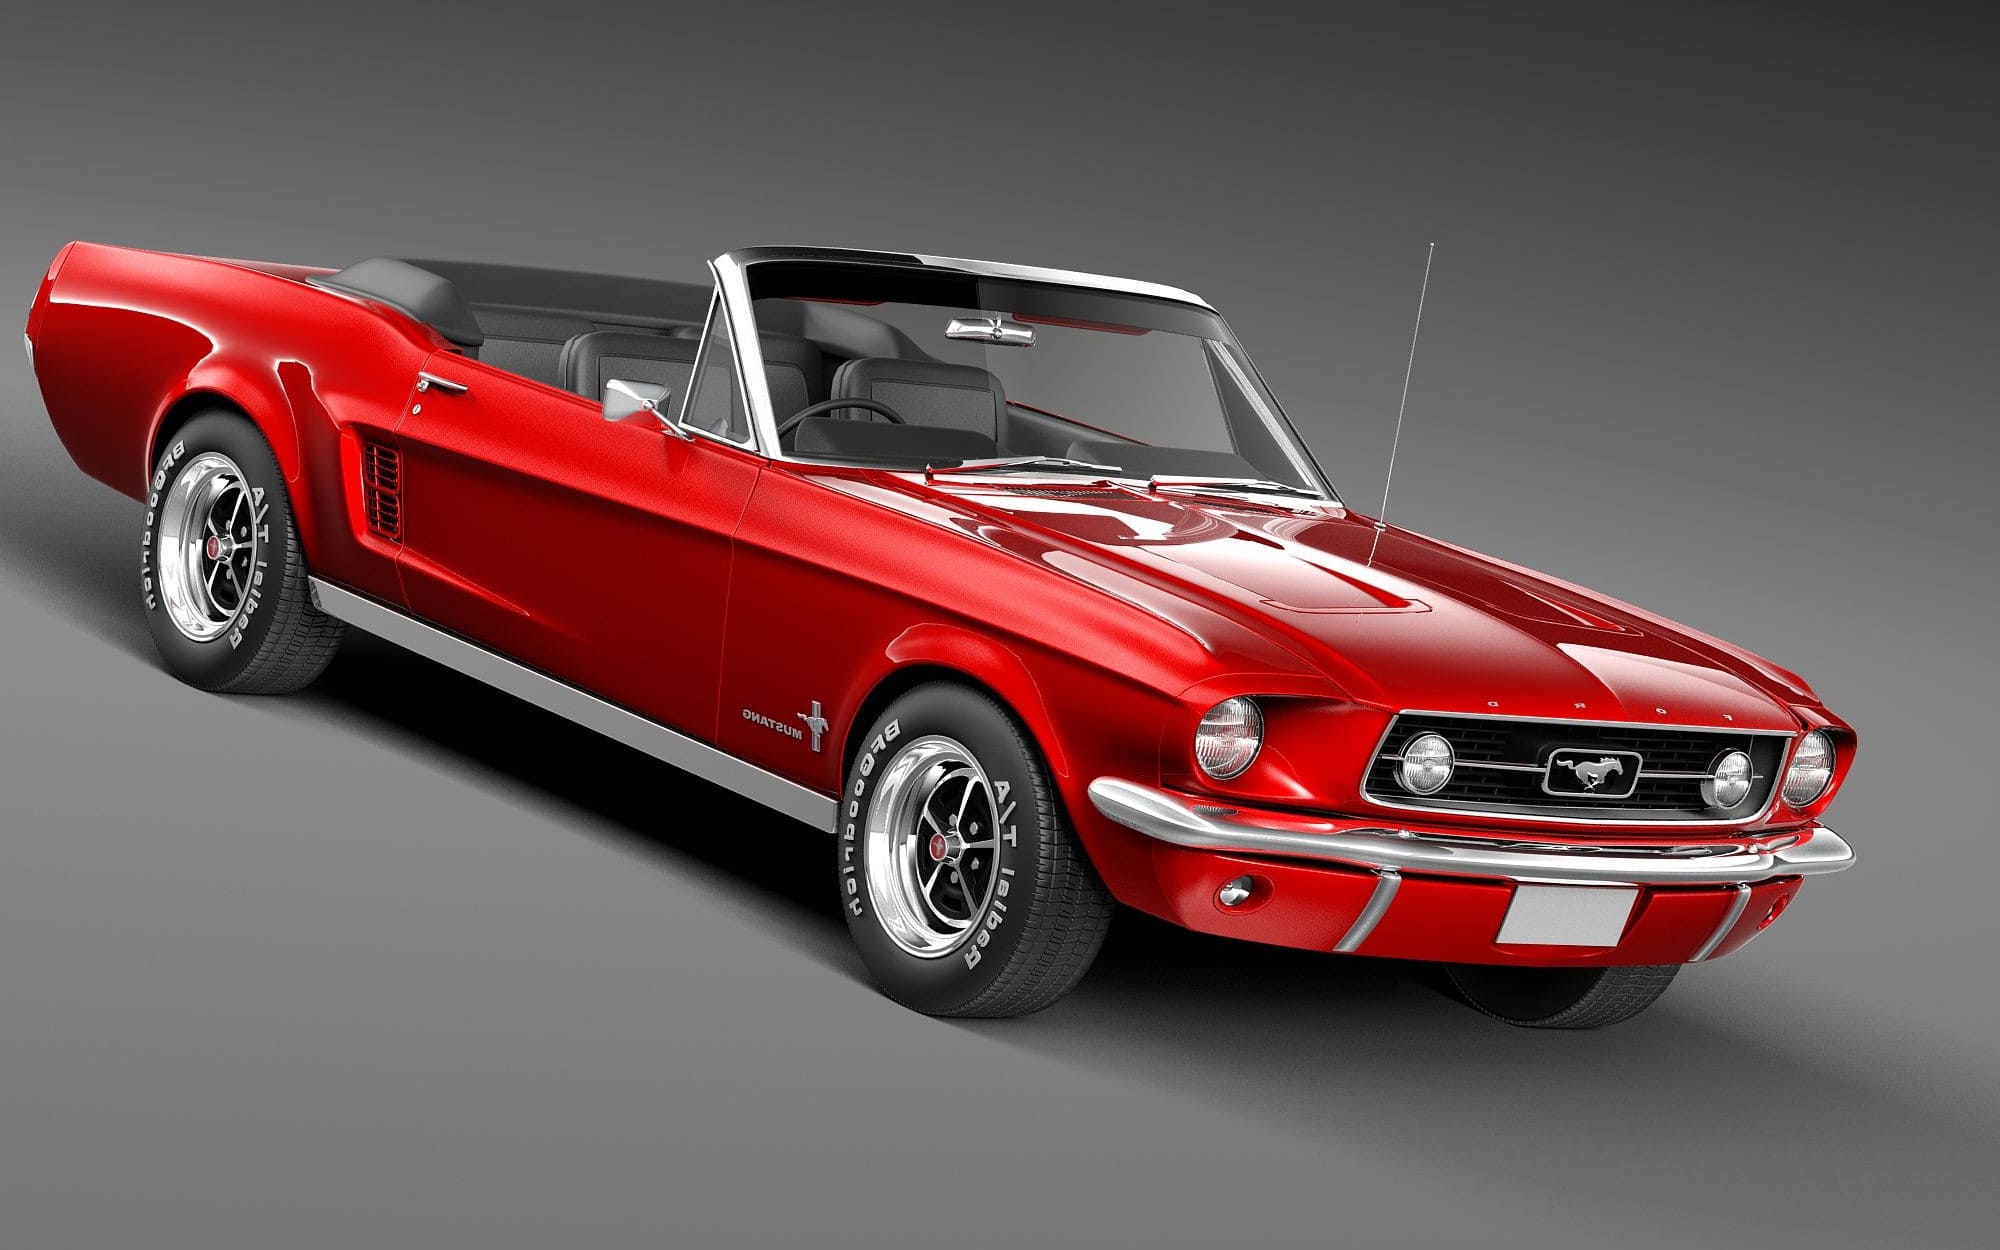 Ford Mustang 1967 | Car brands - car logos, meaning and symbol